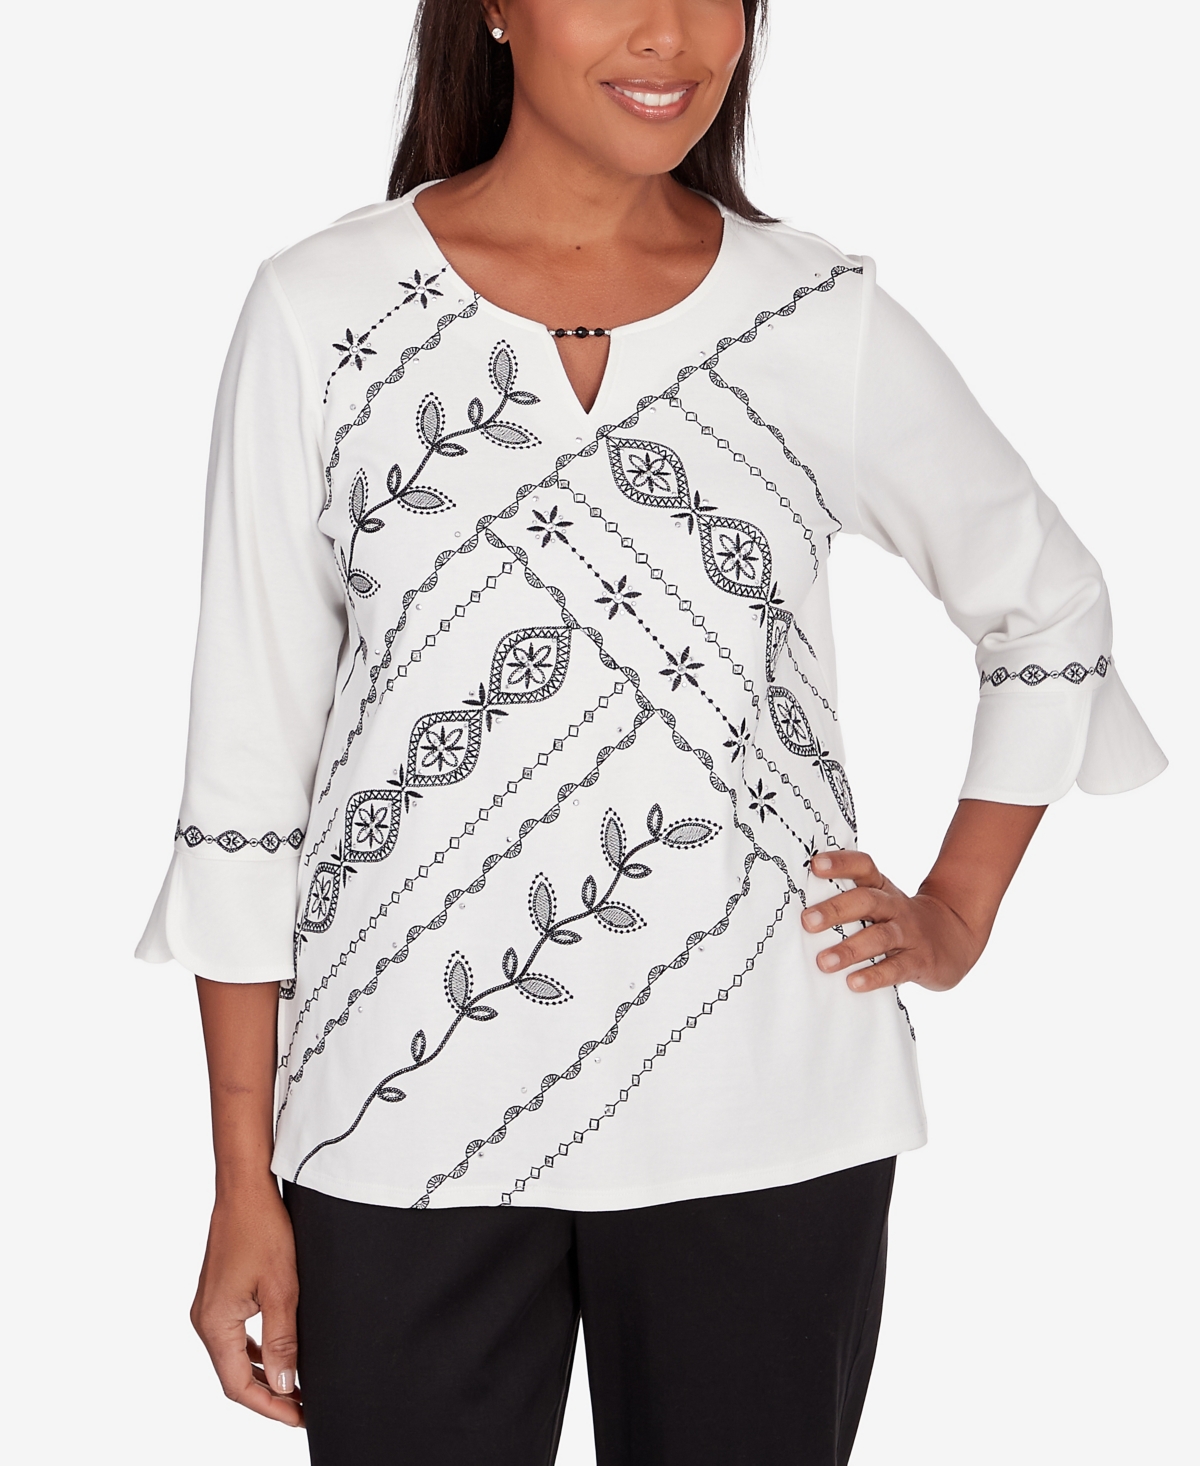 Women's Opposites Attract Embroidered Leaf Keyhole Neck Top - White